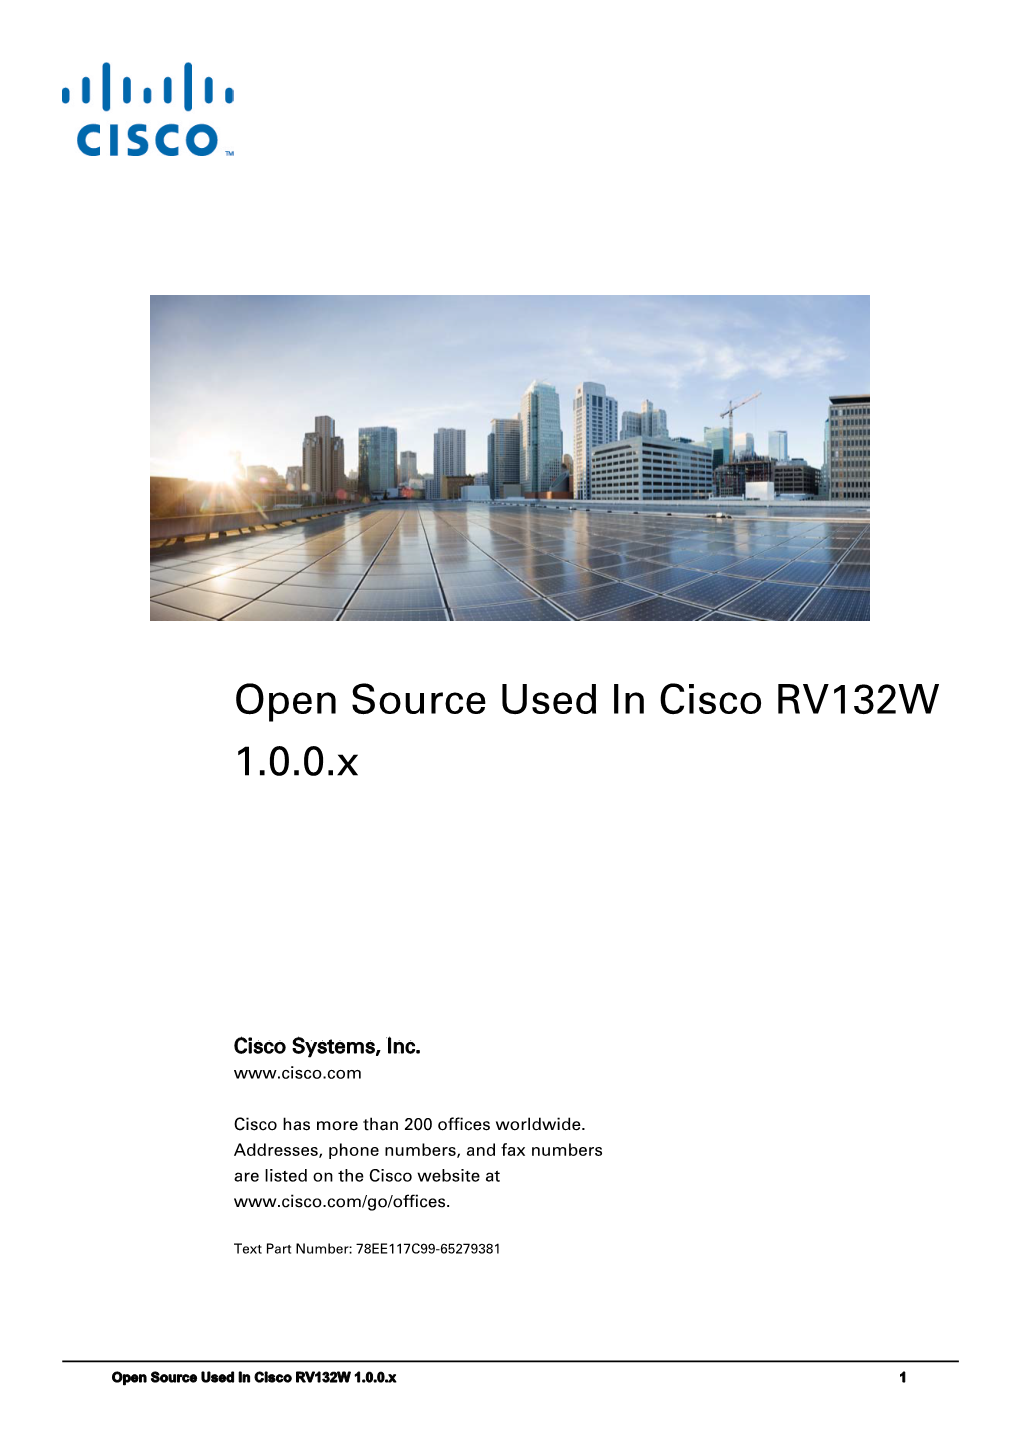 Open Source Used in Cisco RV132 1.0.0.X